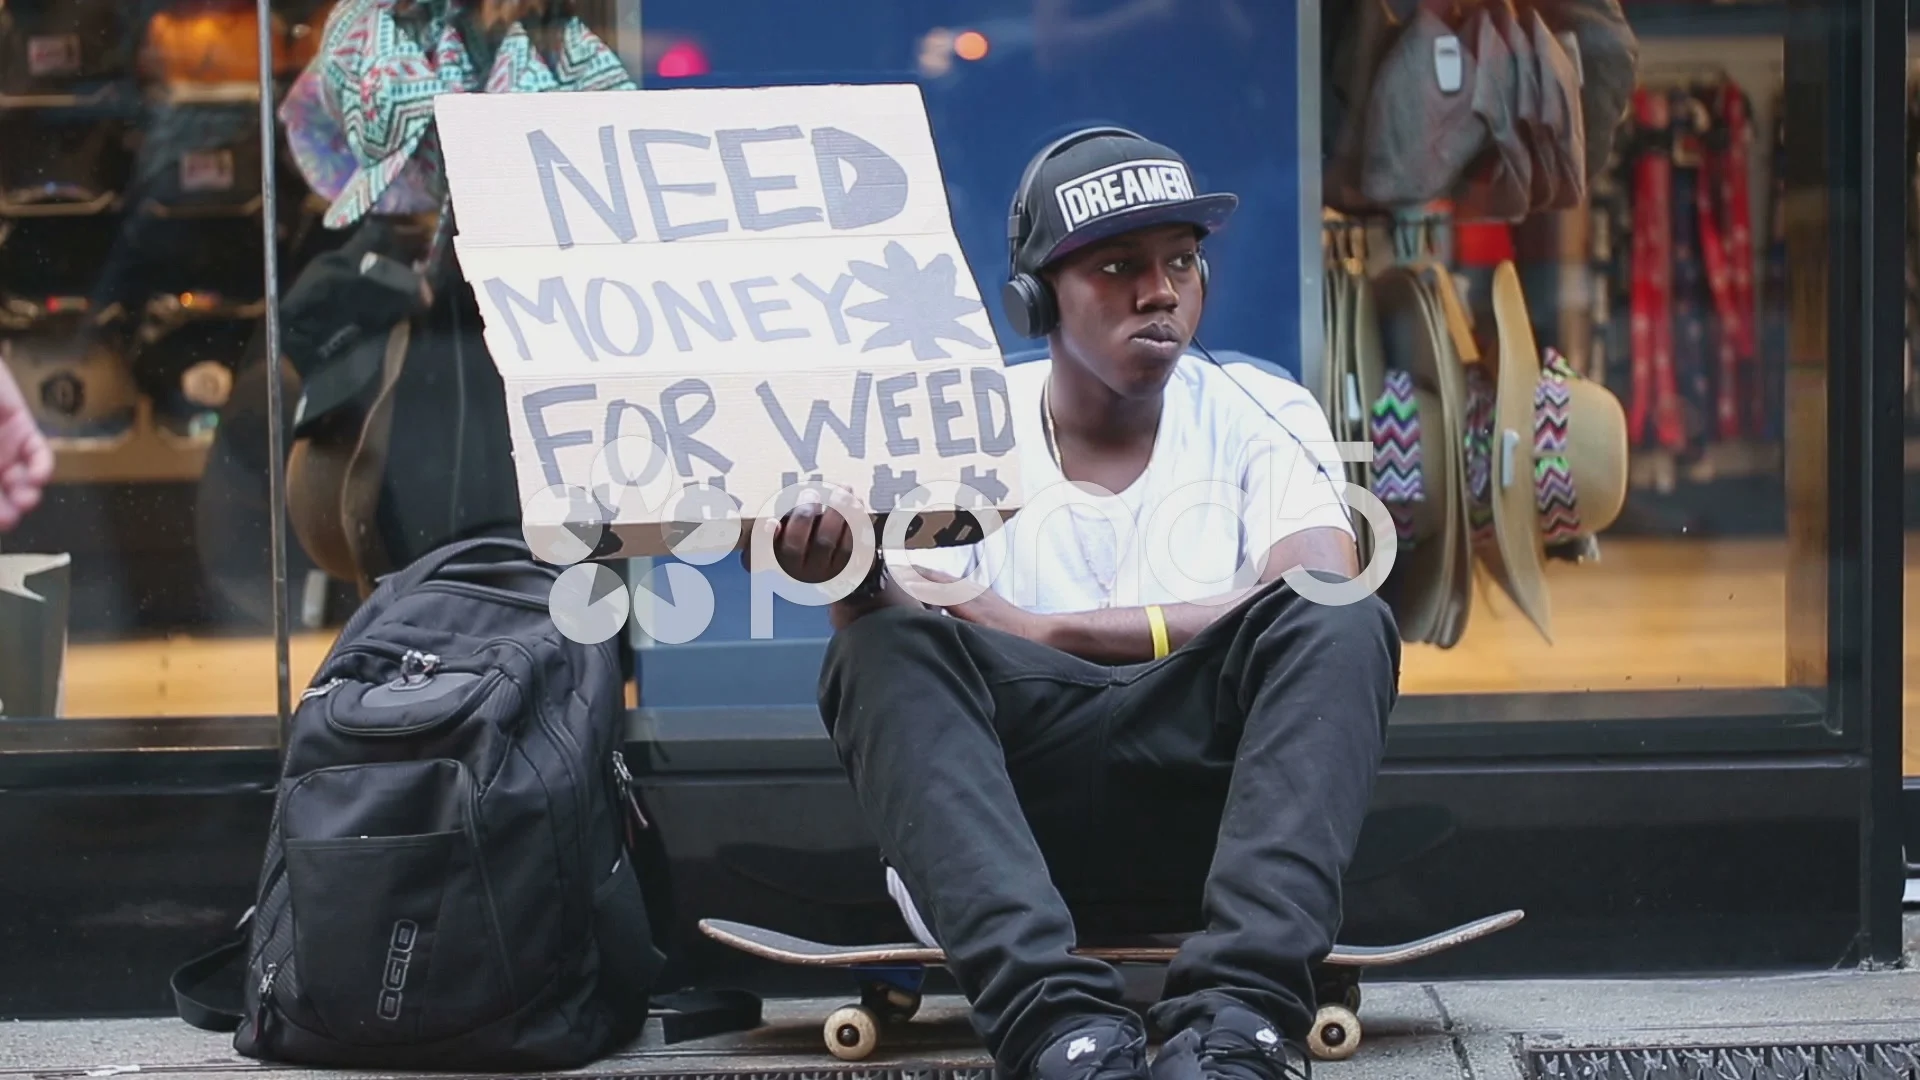 homeless-sign-need-money-weed-footage-04